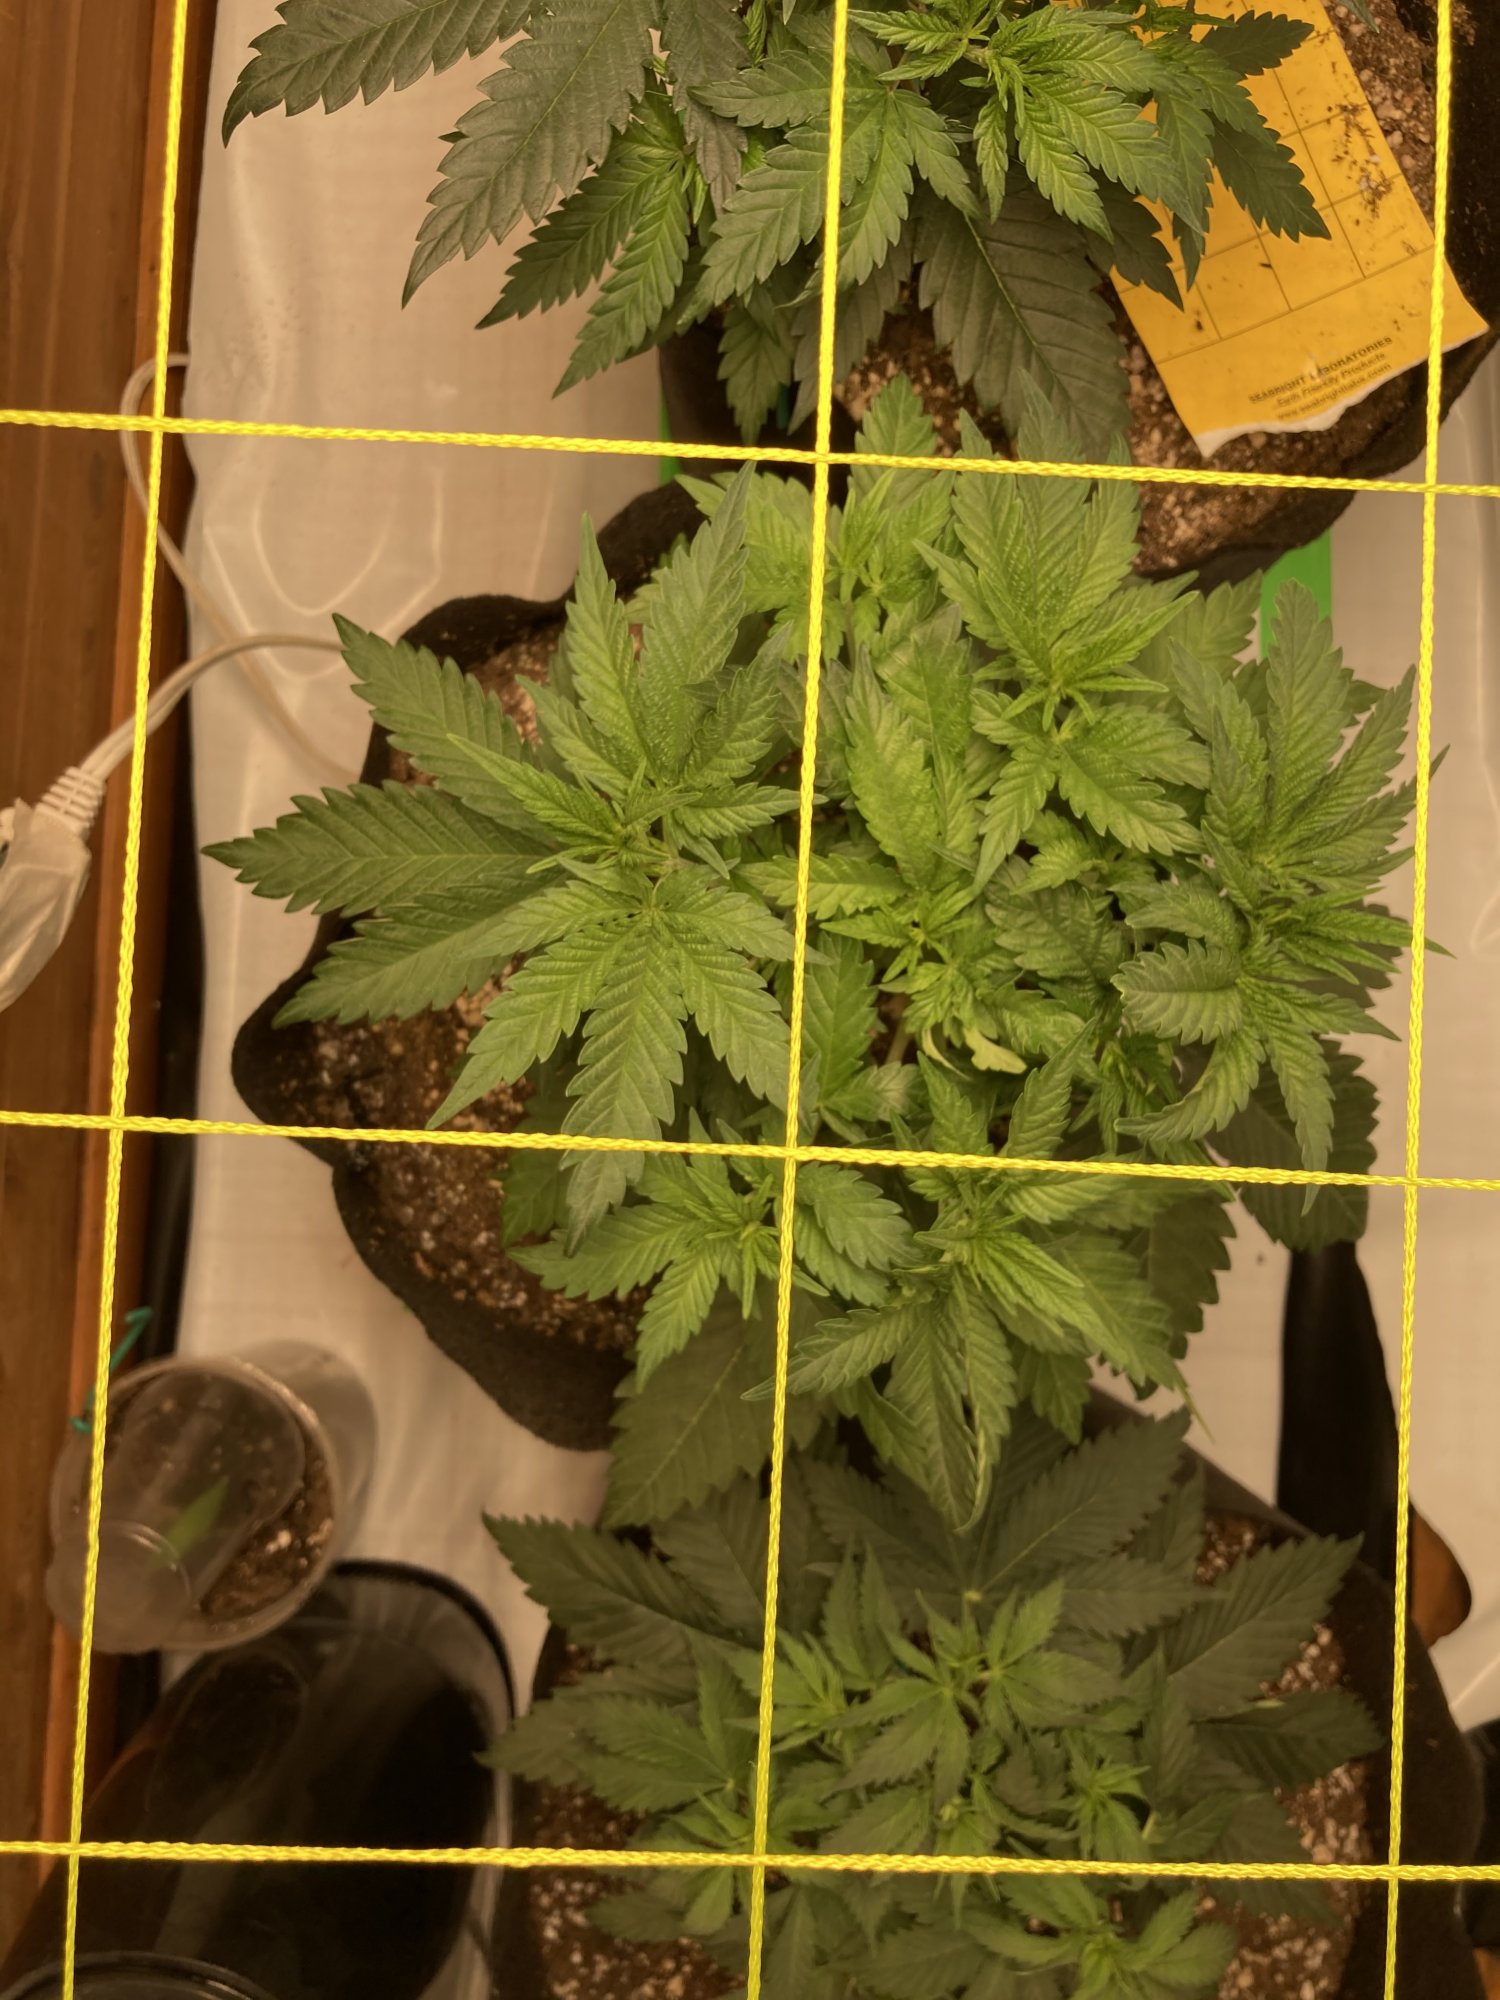 Day 37 from seed 2x8 closet scrog help 3